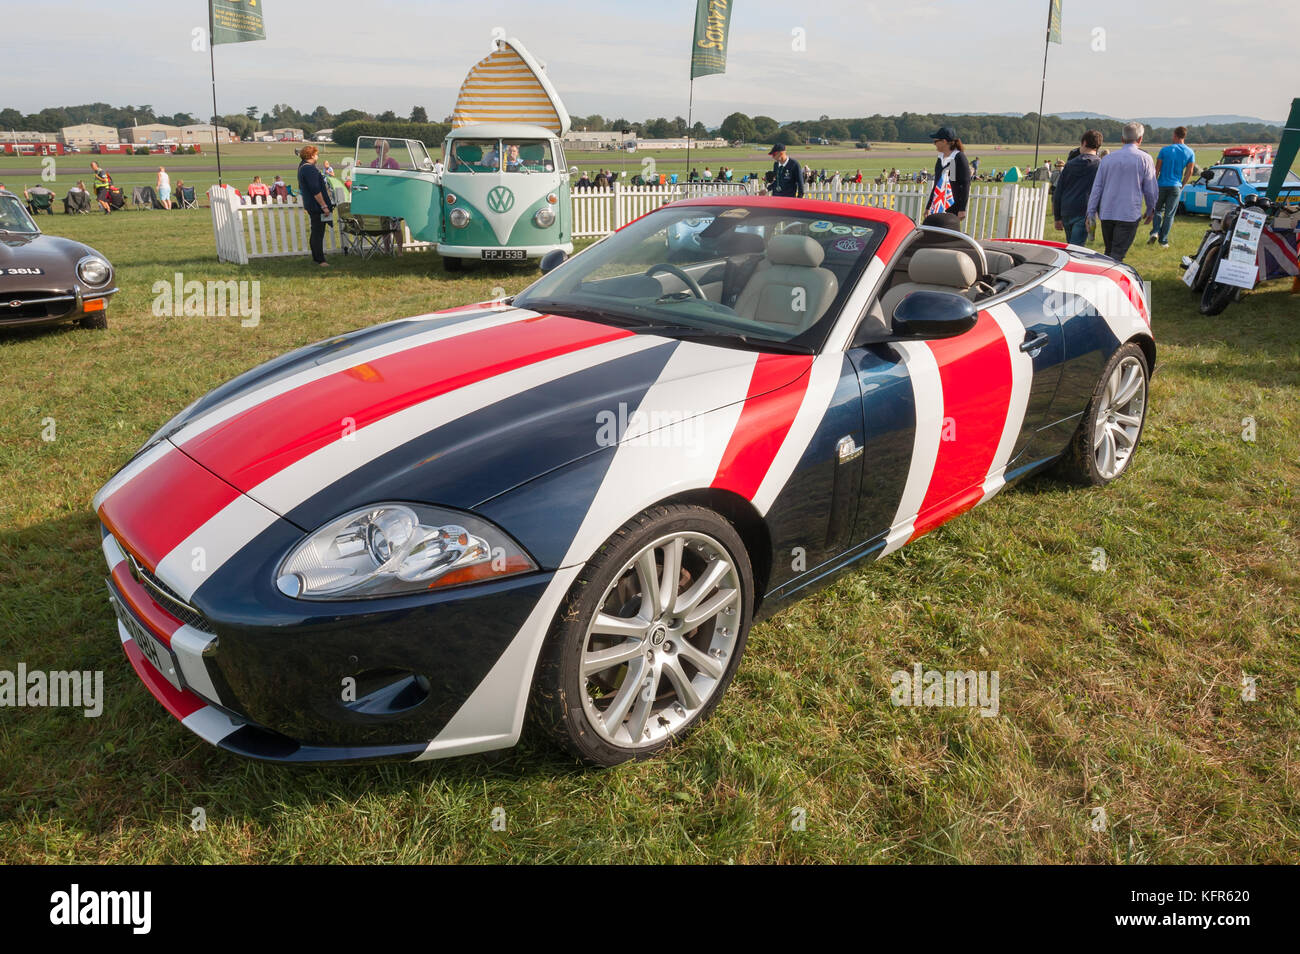 Dunsfold, UK - August 26, 2017: Special edition Jaguar XK drop-top convertible with GB flag paintwork at a gathering of vintage vehicles in Dunsfold,  Stock Photo